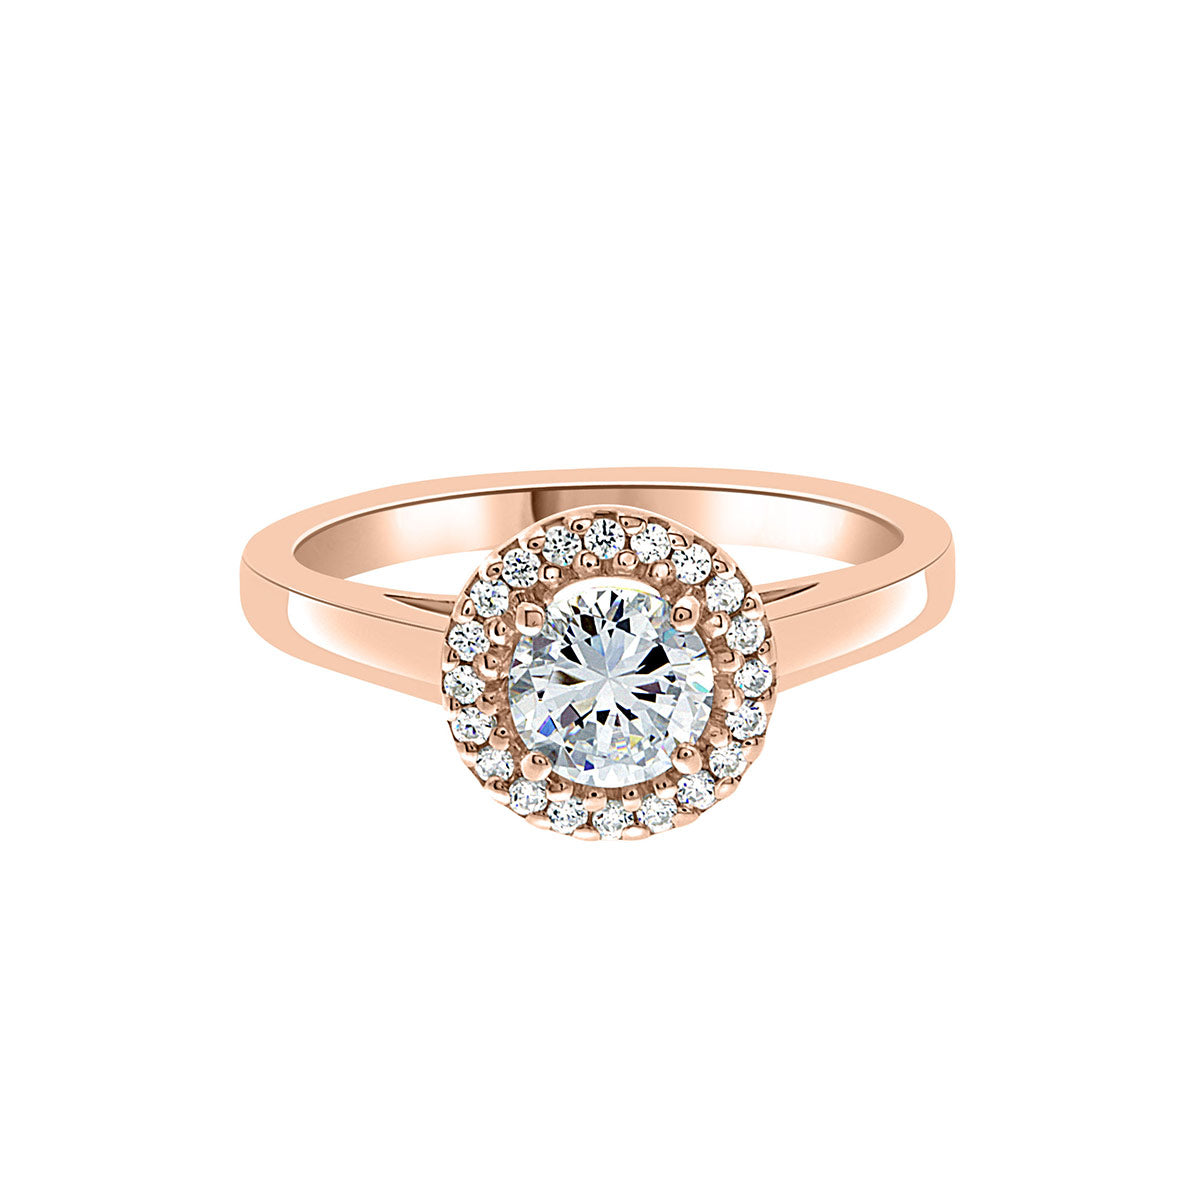 Round Vintage Engagement Ring in rose gold,  a horizontal position against a white background.